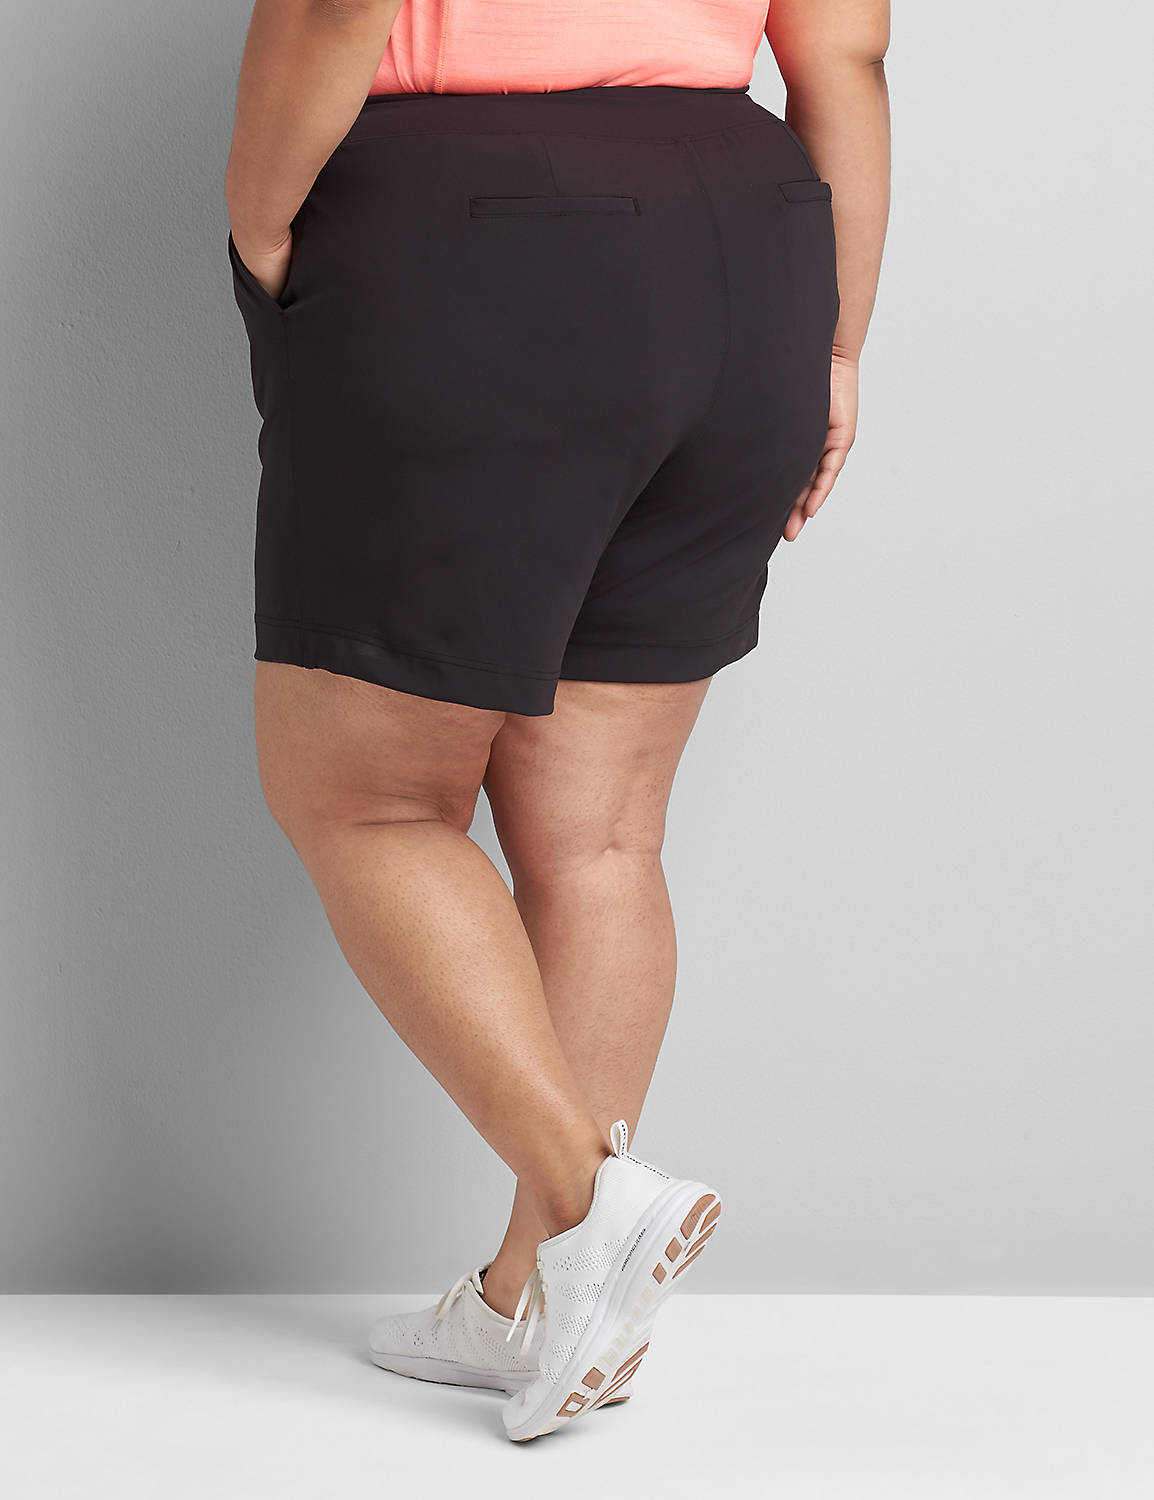 Pull On Stretch Short S 1120817:Ascena Black:18/20 Product Image 2